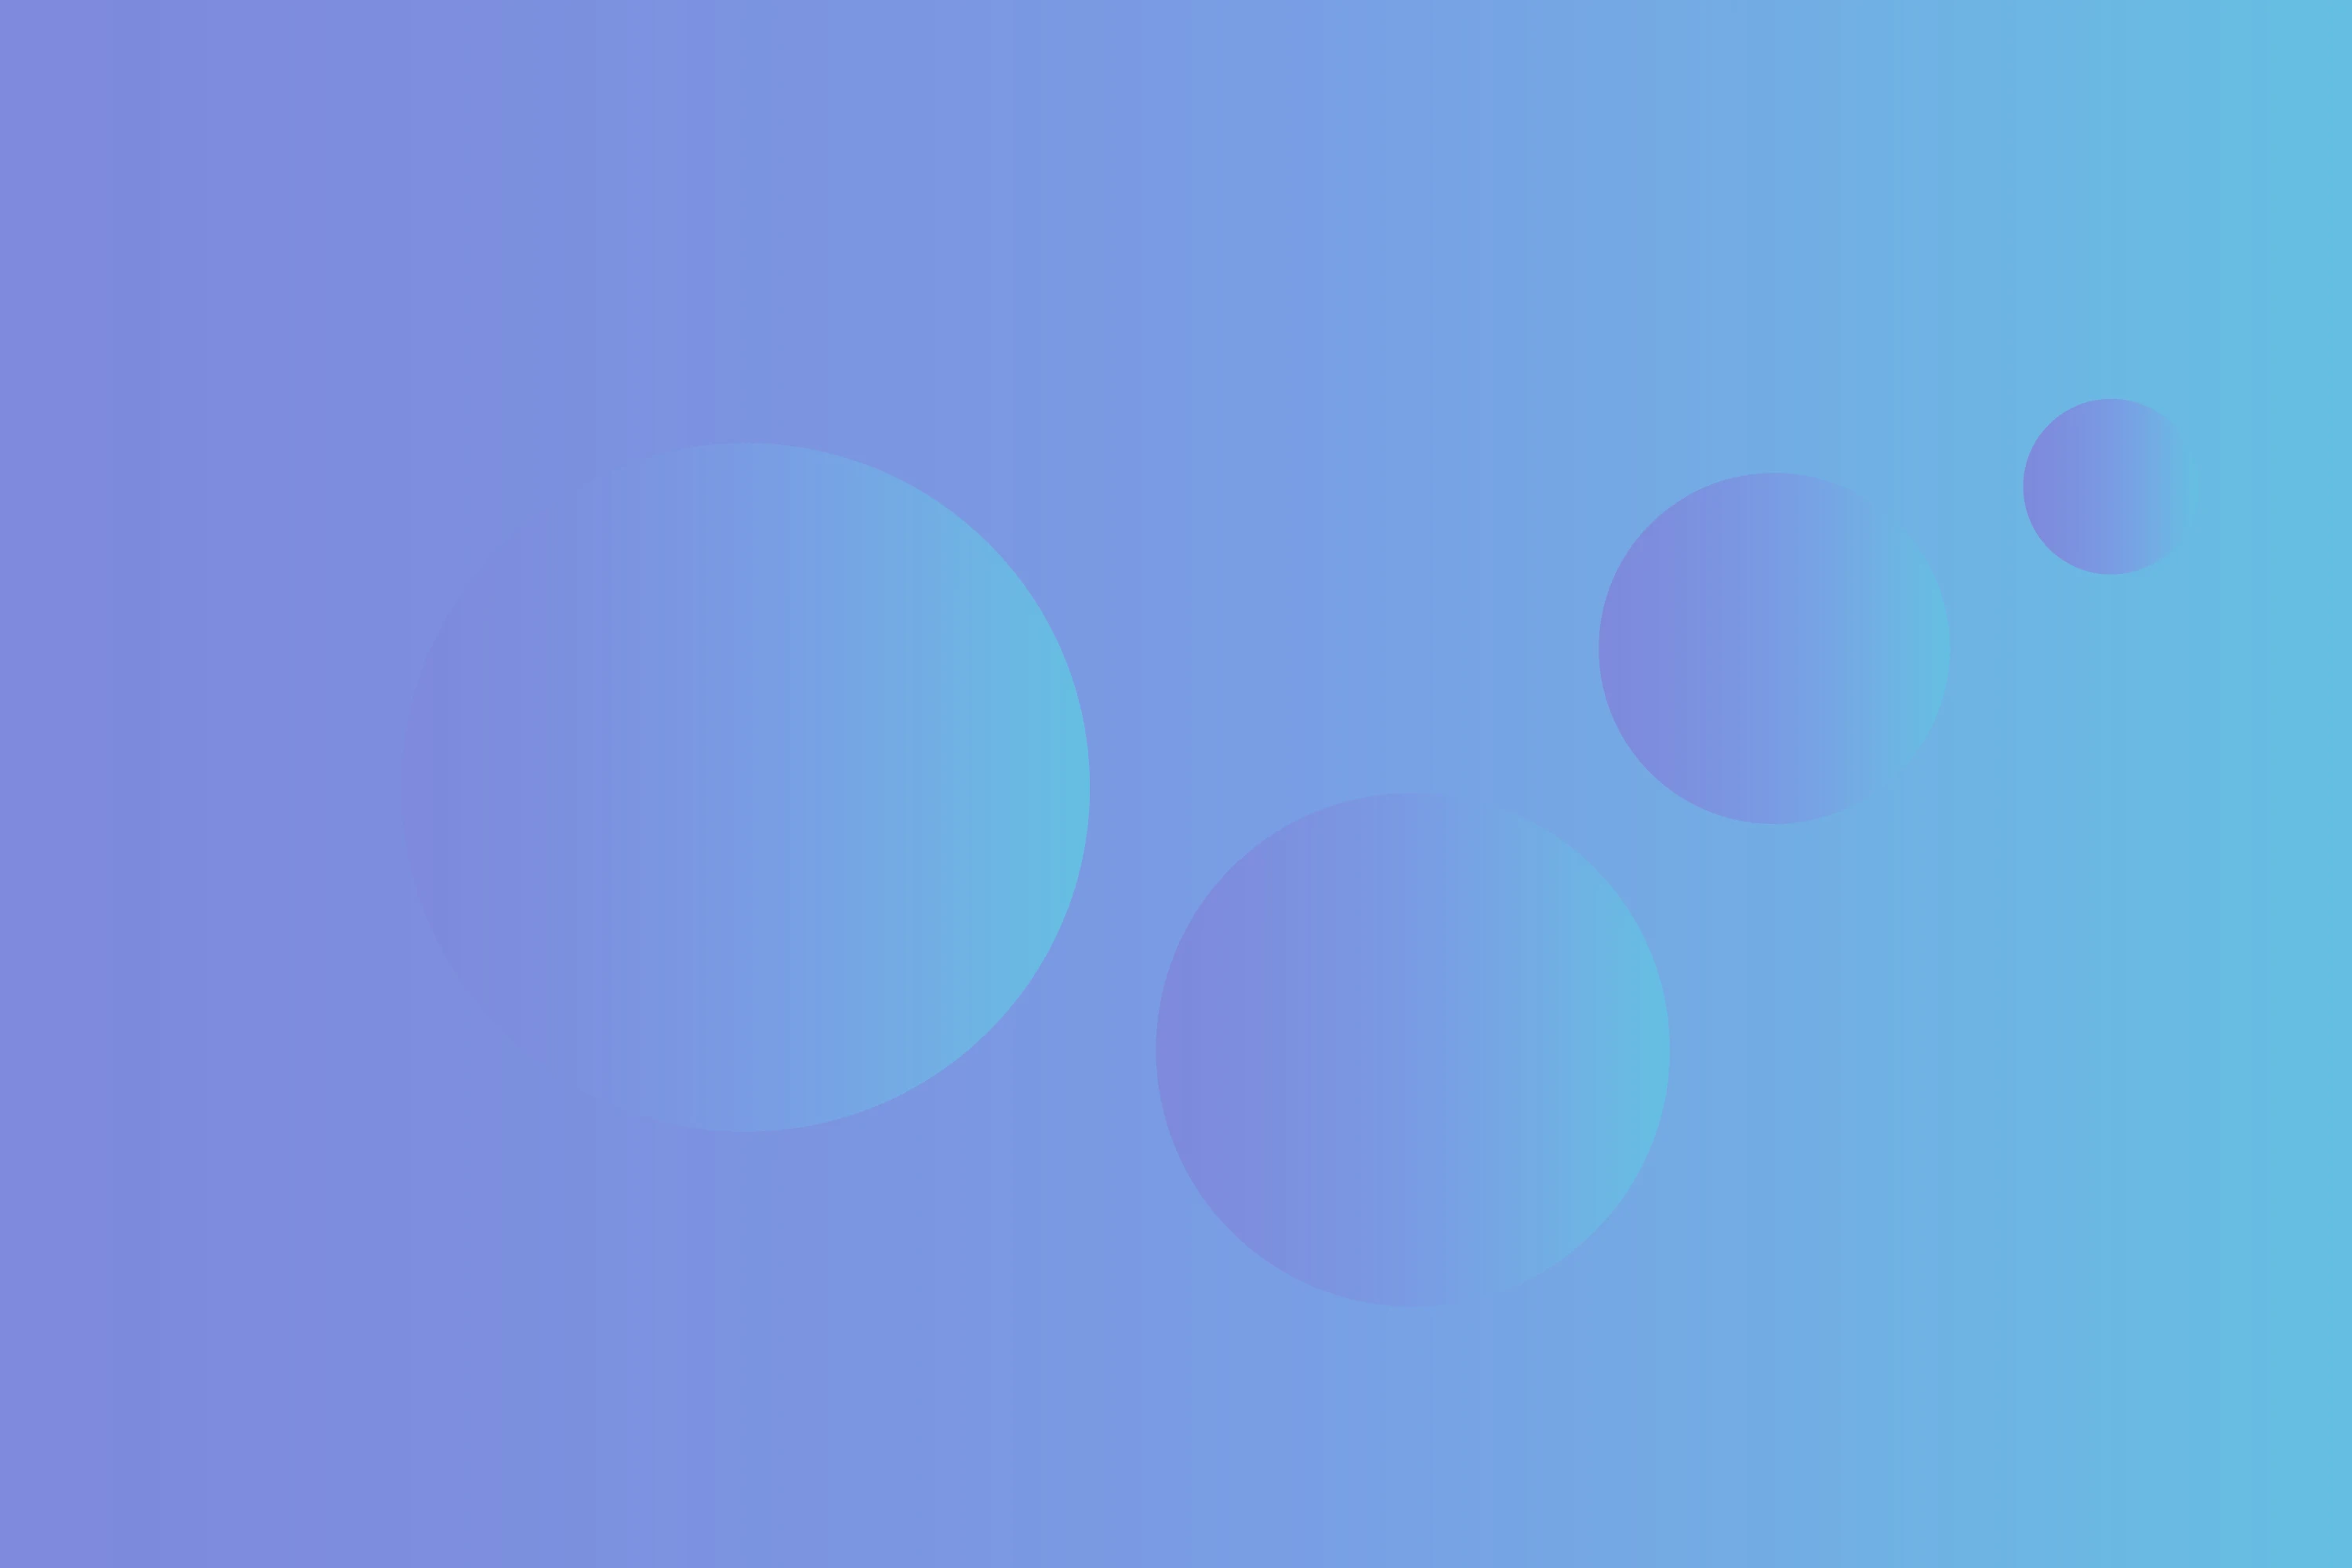 r130-blue-balls-recolored-16980927513399.png